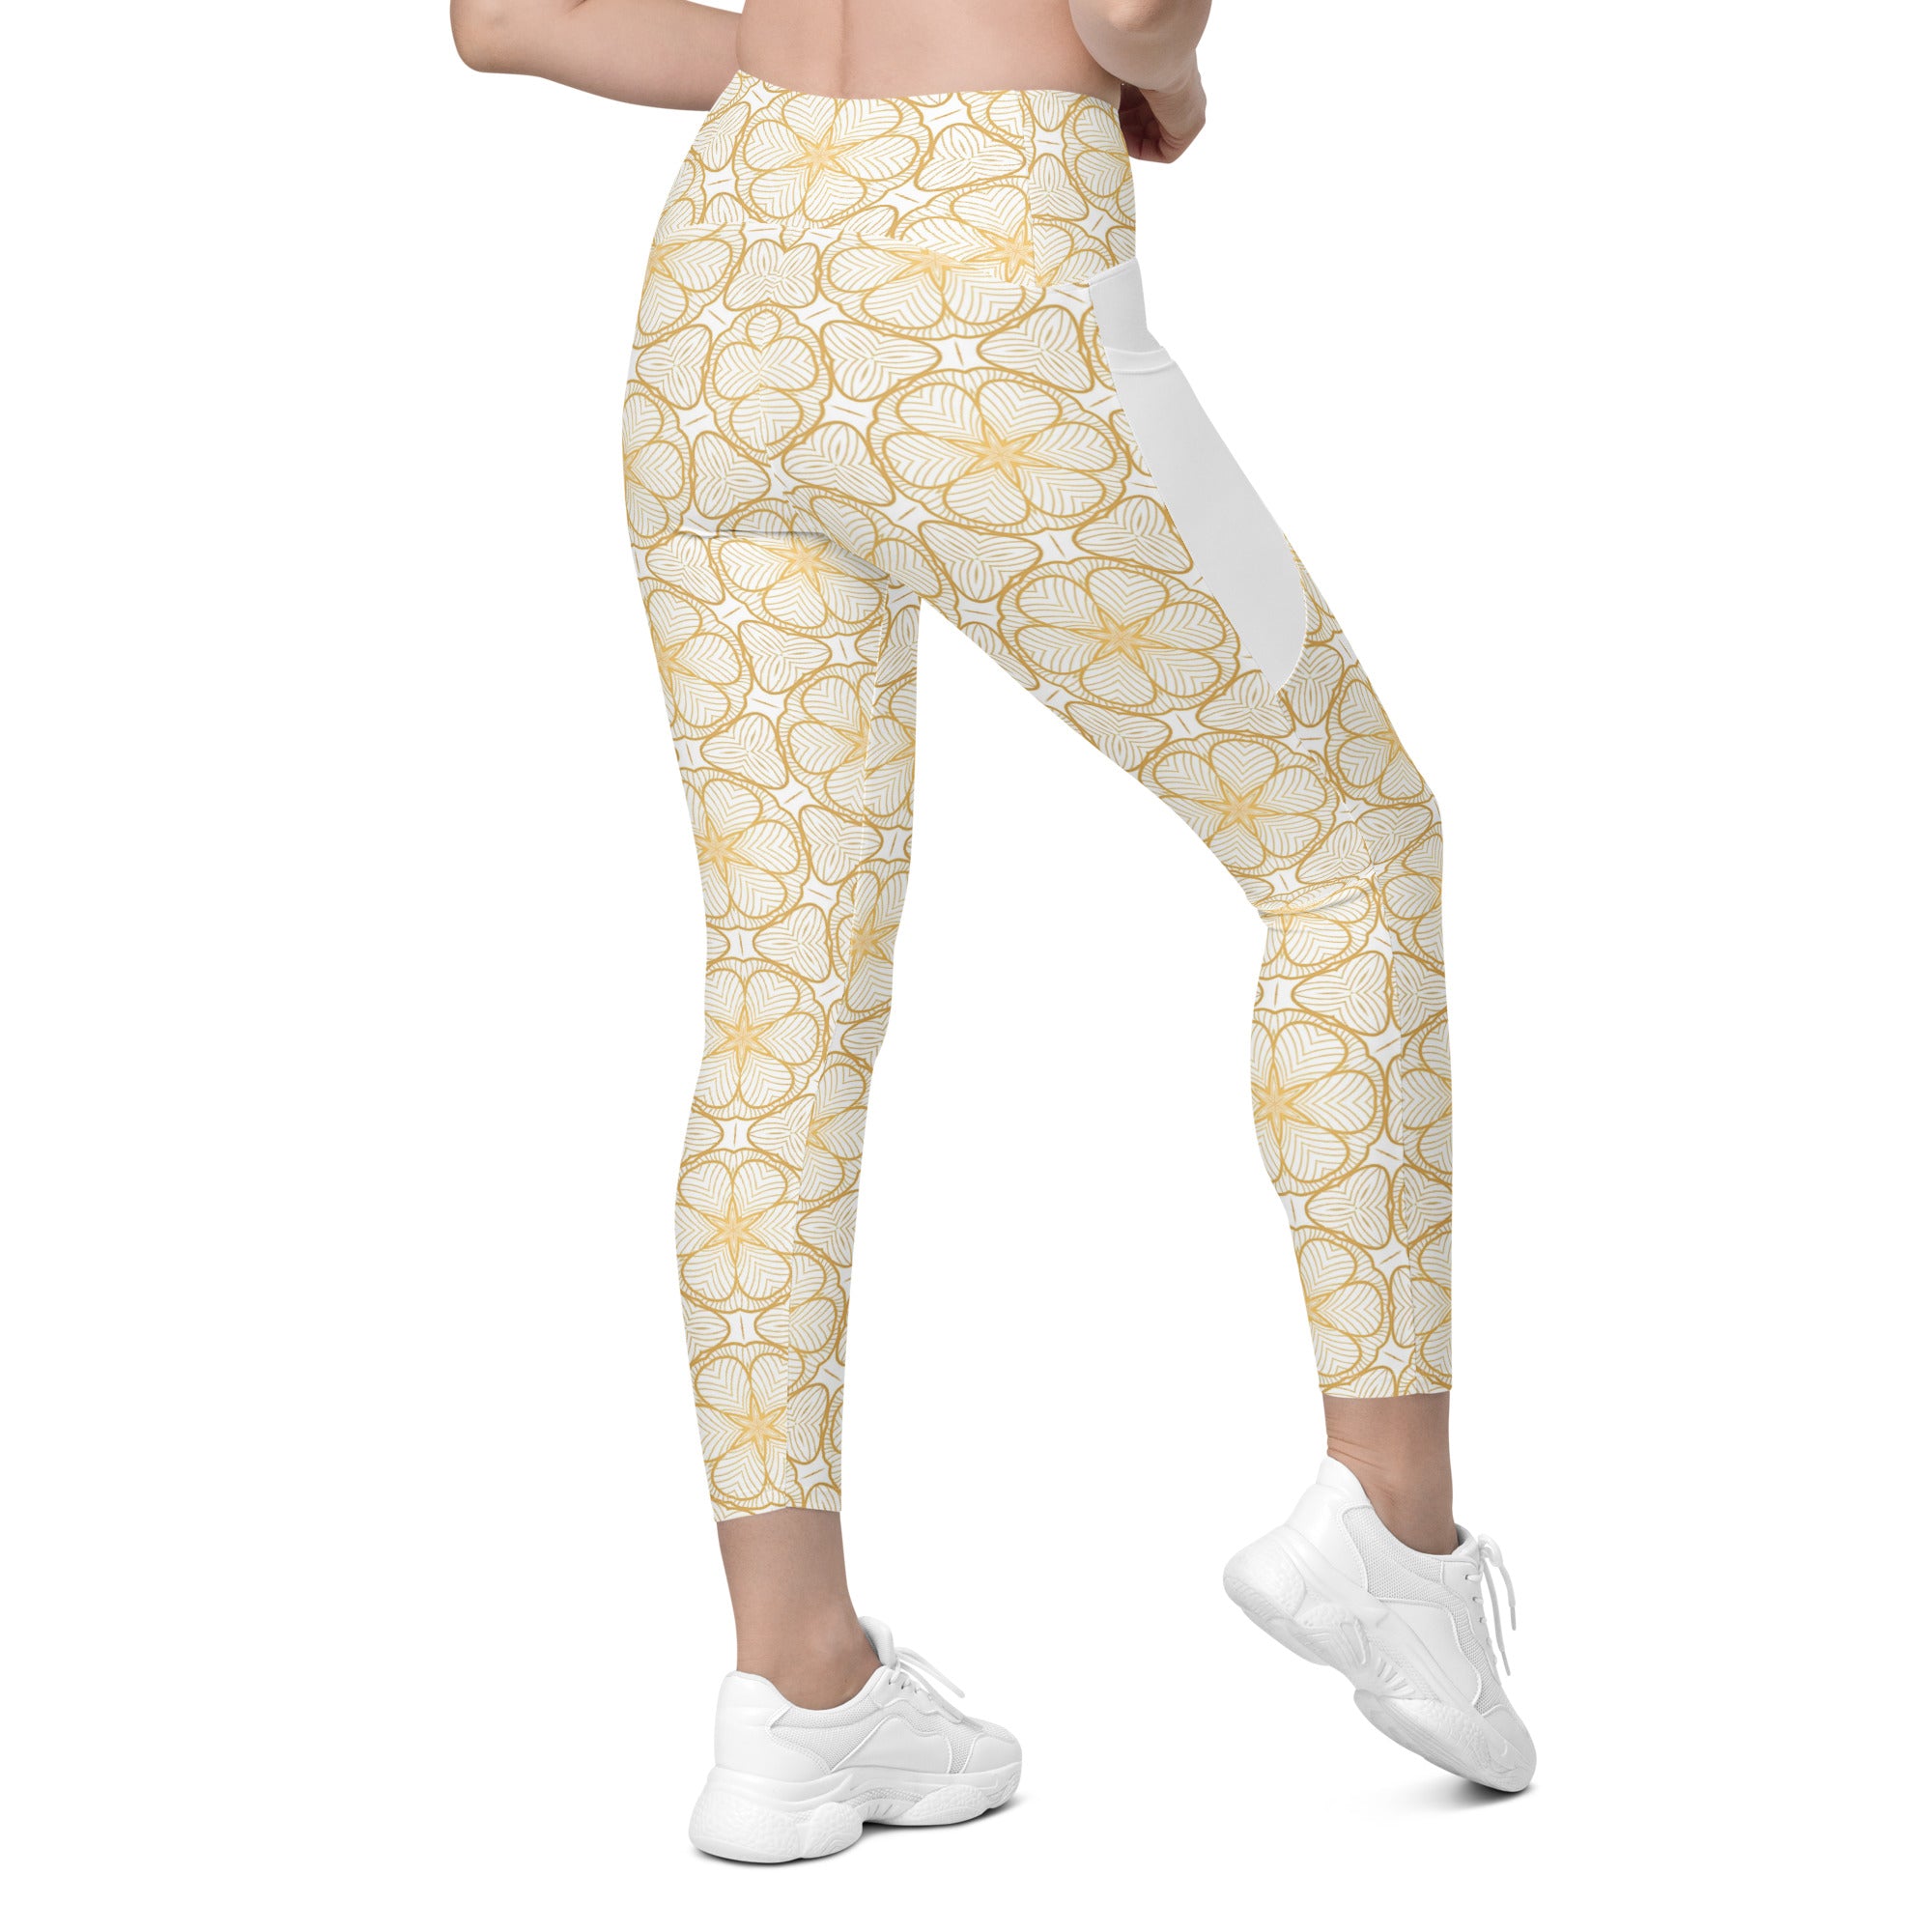 Colorful Floral Fusion Crossover Leggings with Pockets for active wear.